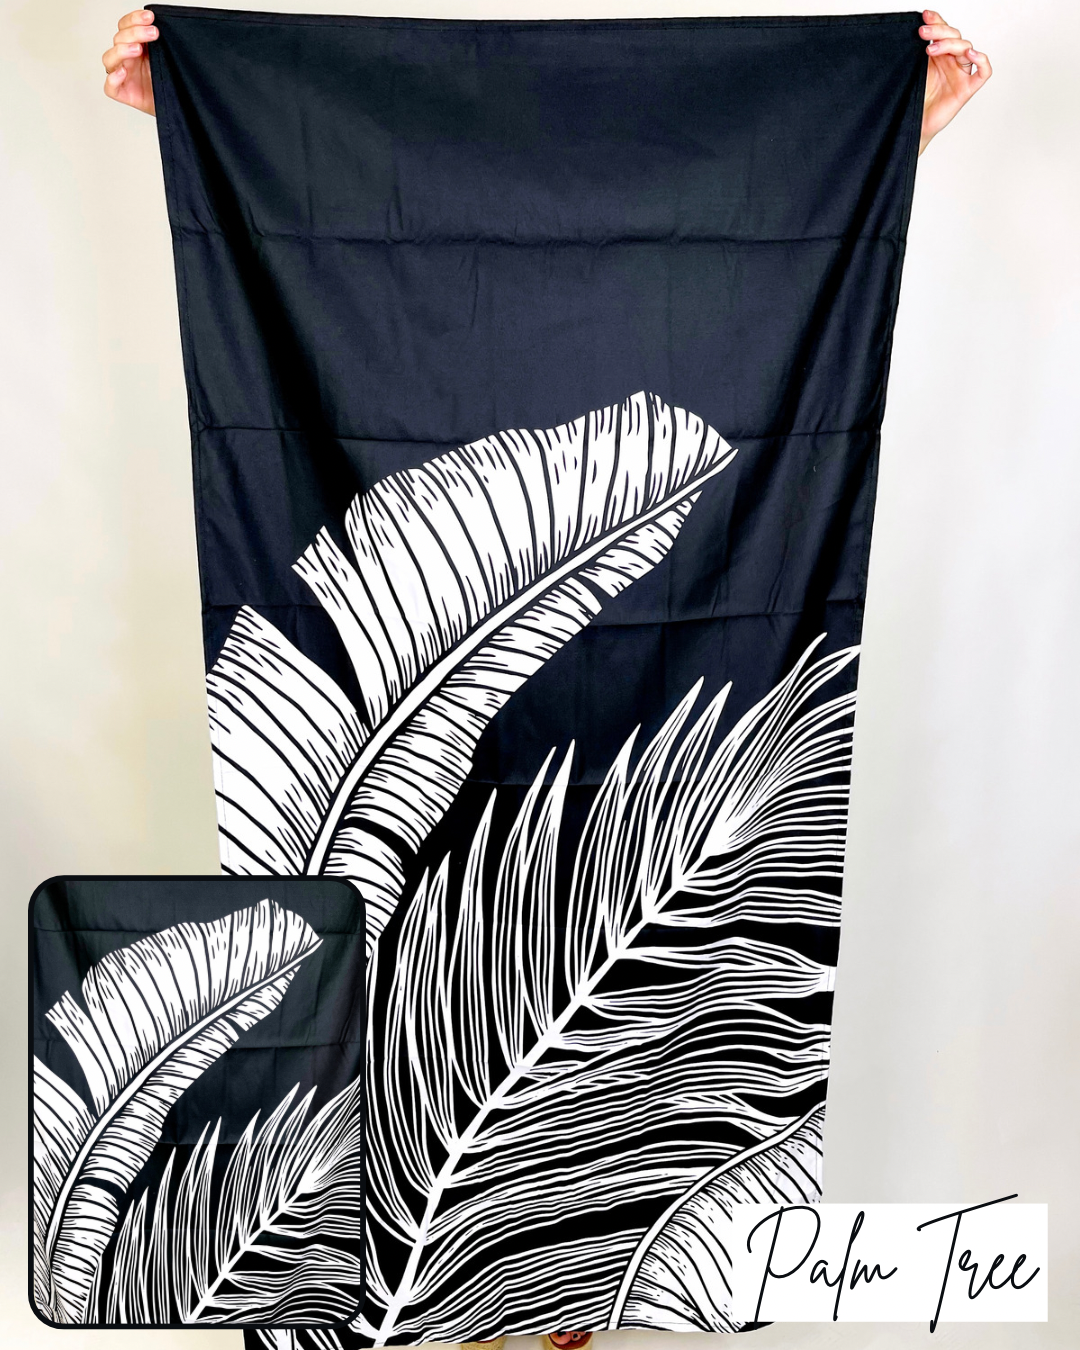 By The Shore Beach Towel-Beach Towels-Royal Standard-The Village Shoppe, Women’s Fashion Boutique, Shop Online and In Store - Located in Muscle Shoals, AL.